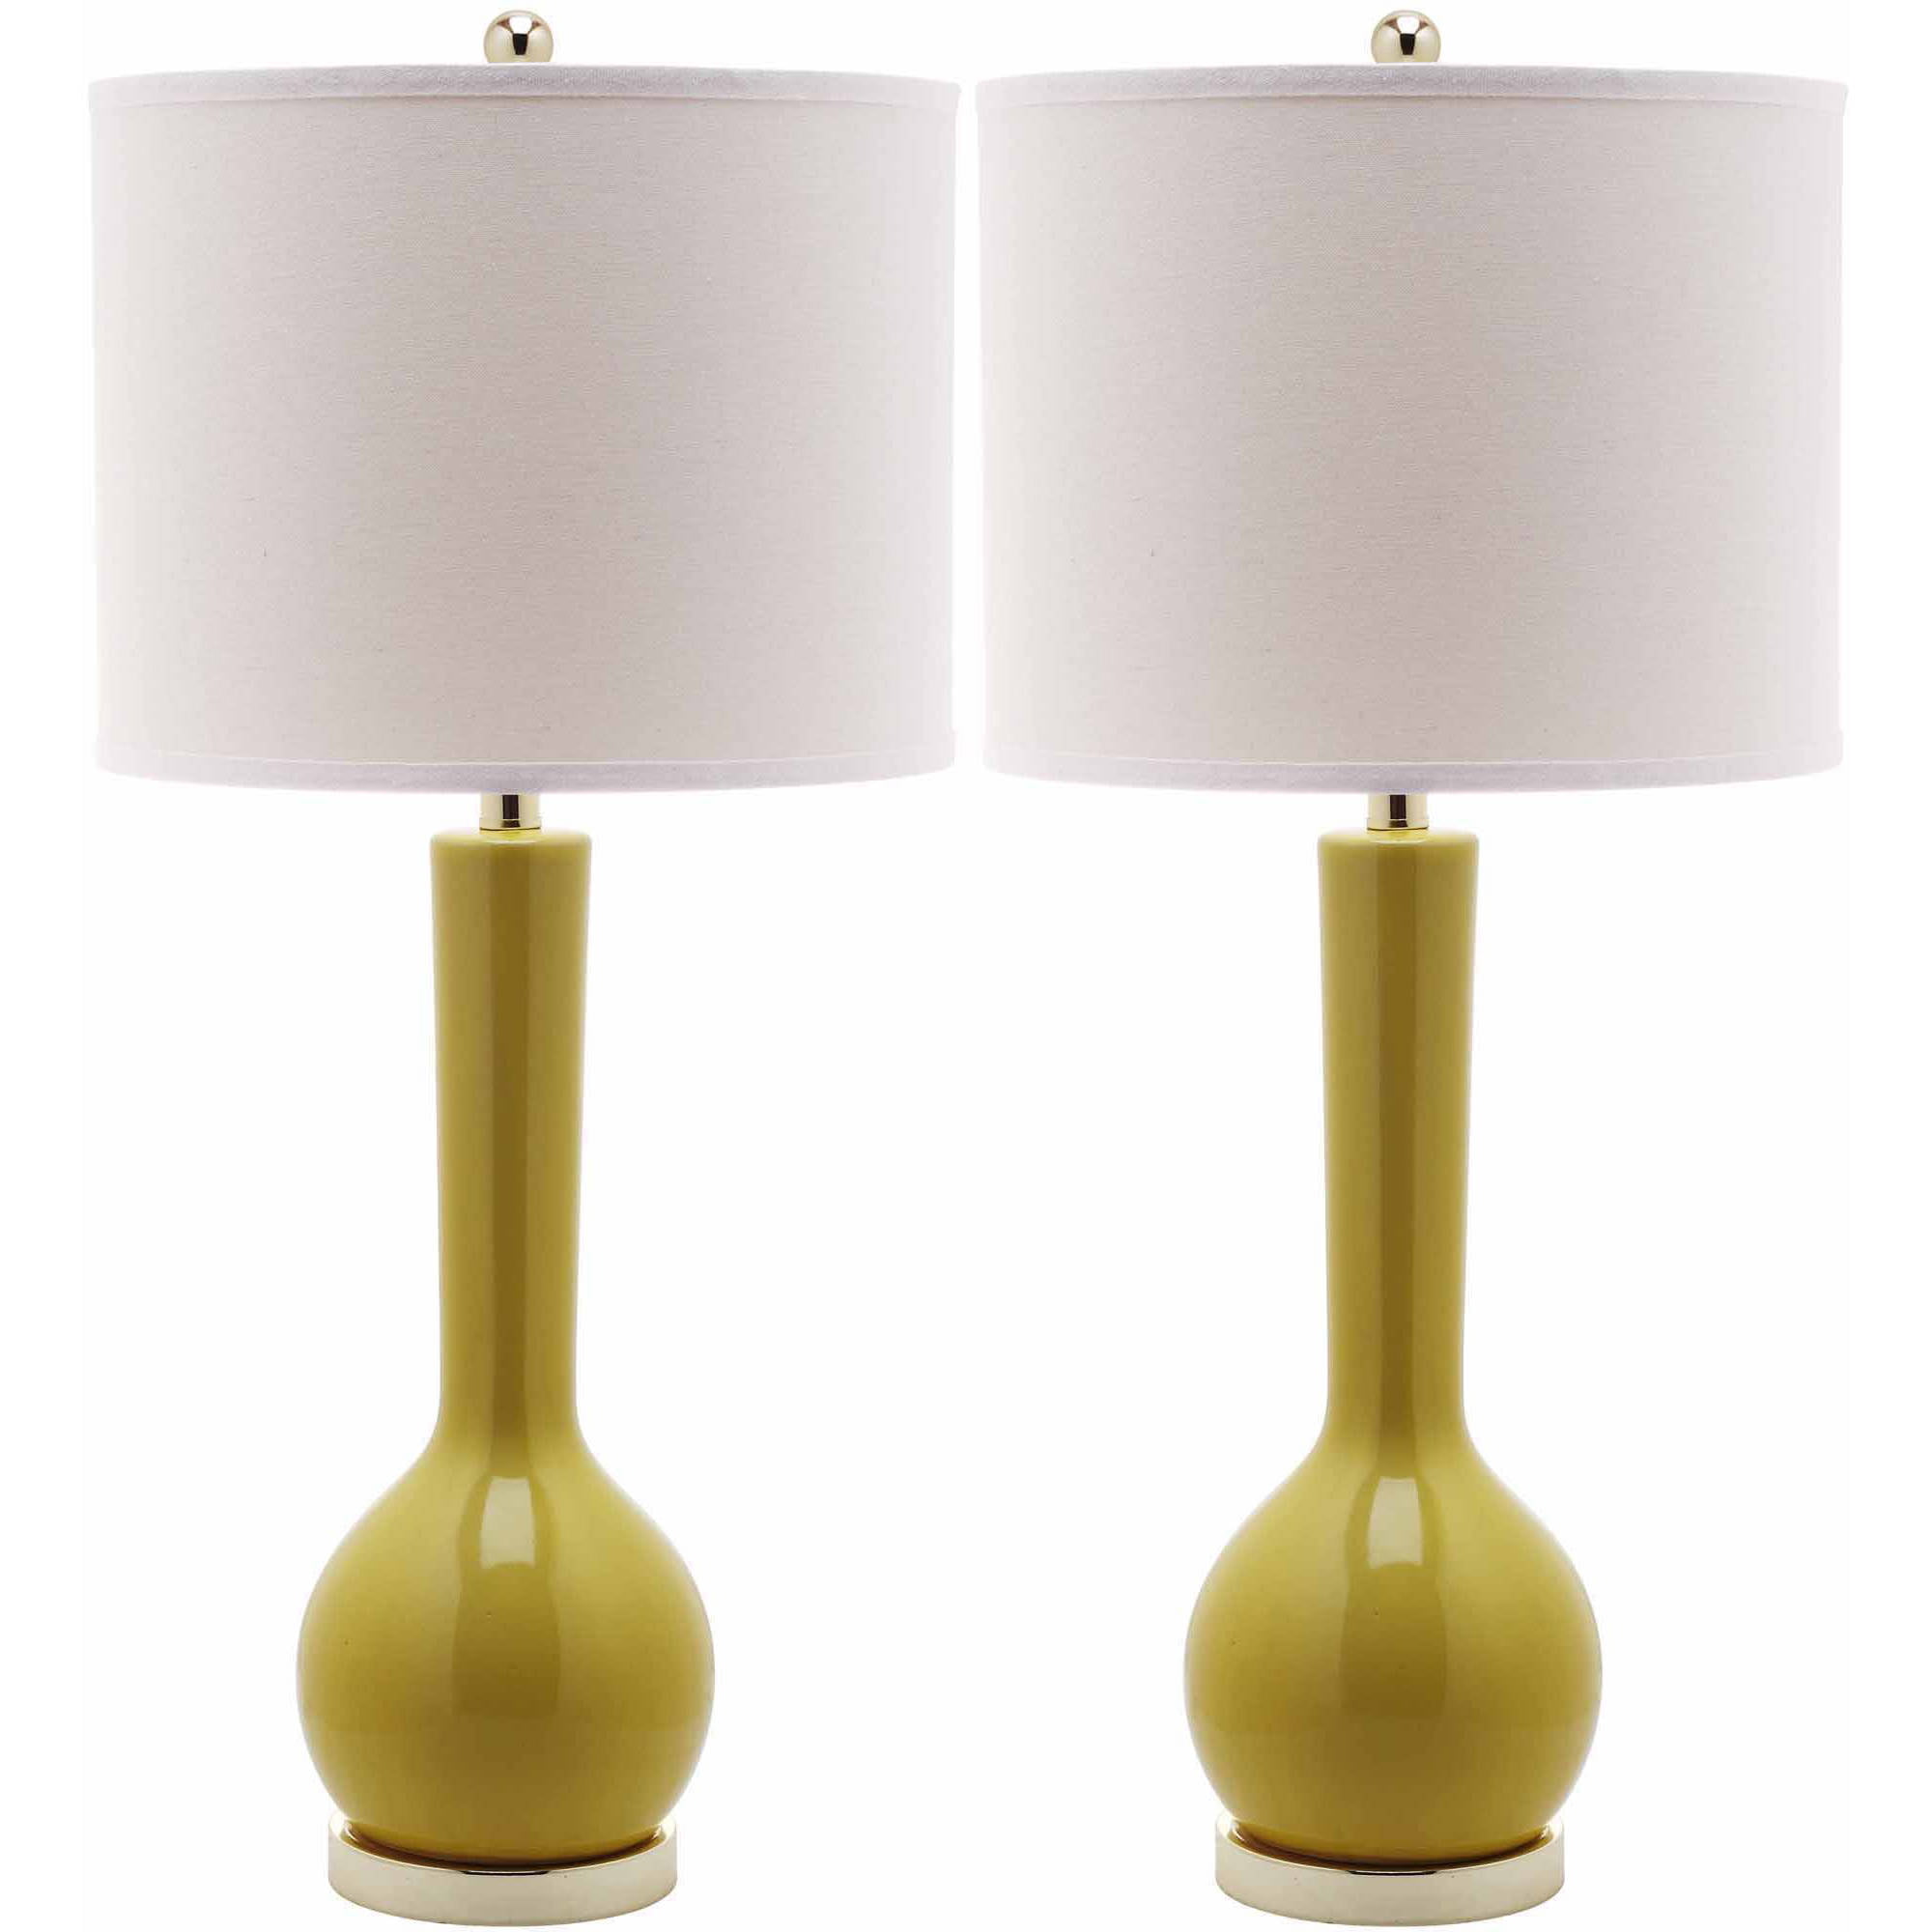 Long Neck Ceramic Table Lamp Set, Extra Wide Table Lamp